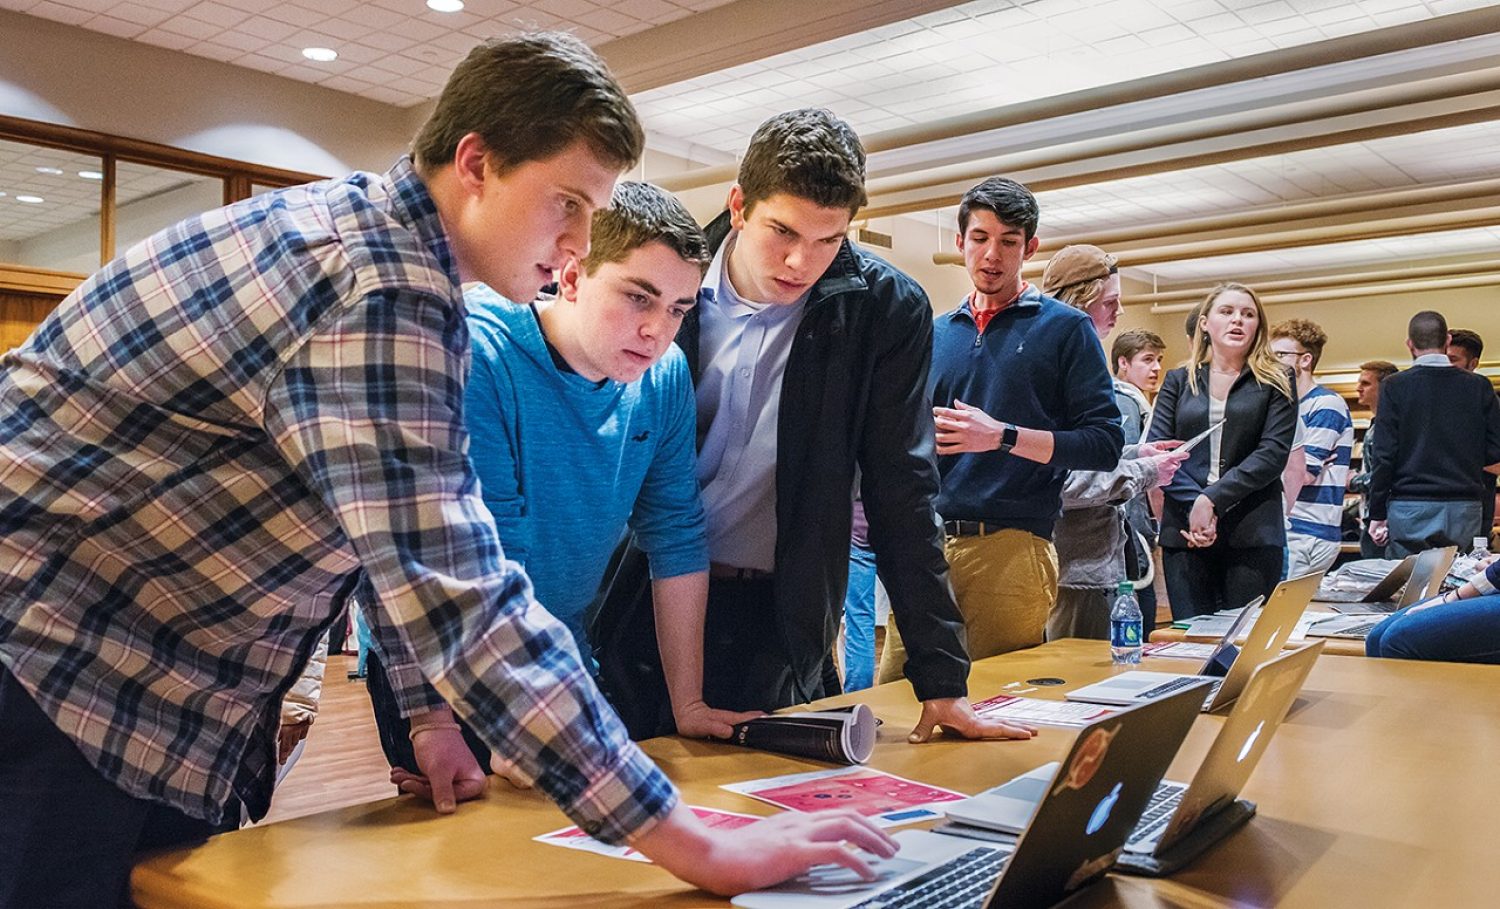 Students view new software at Demo Day